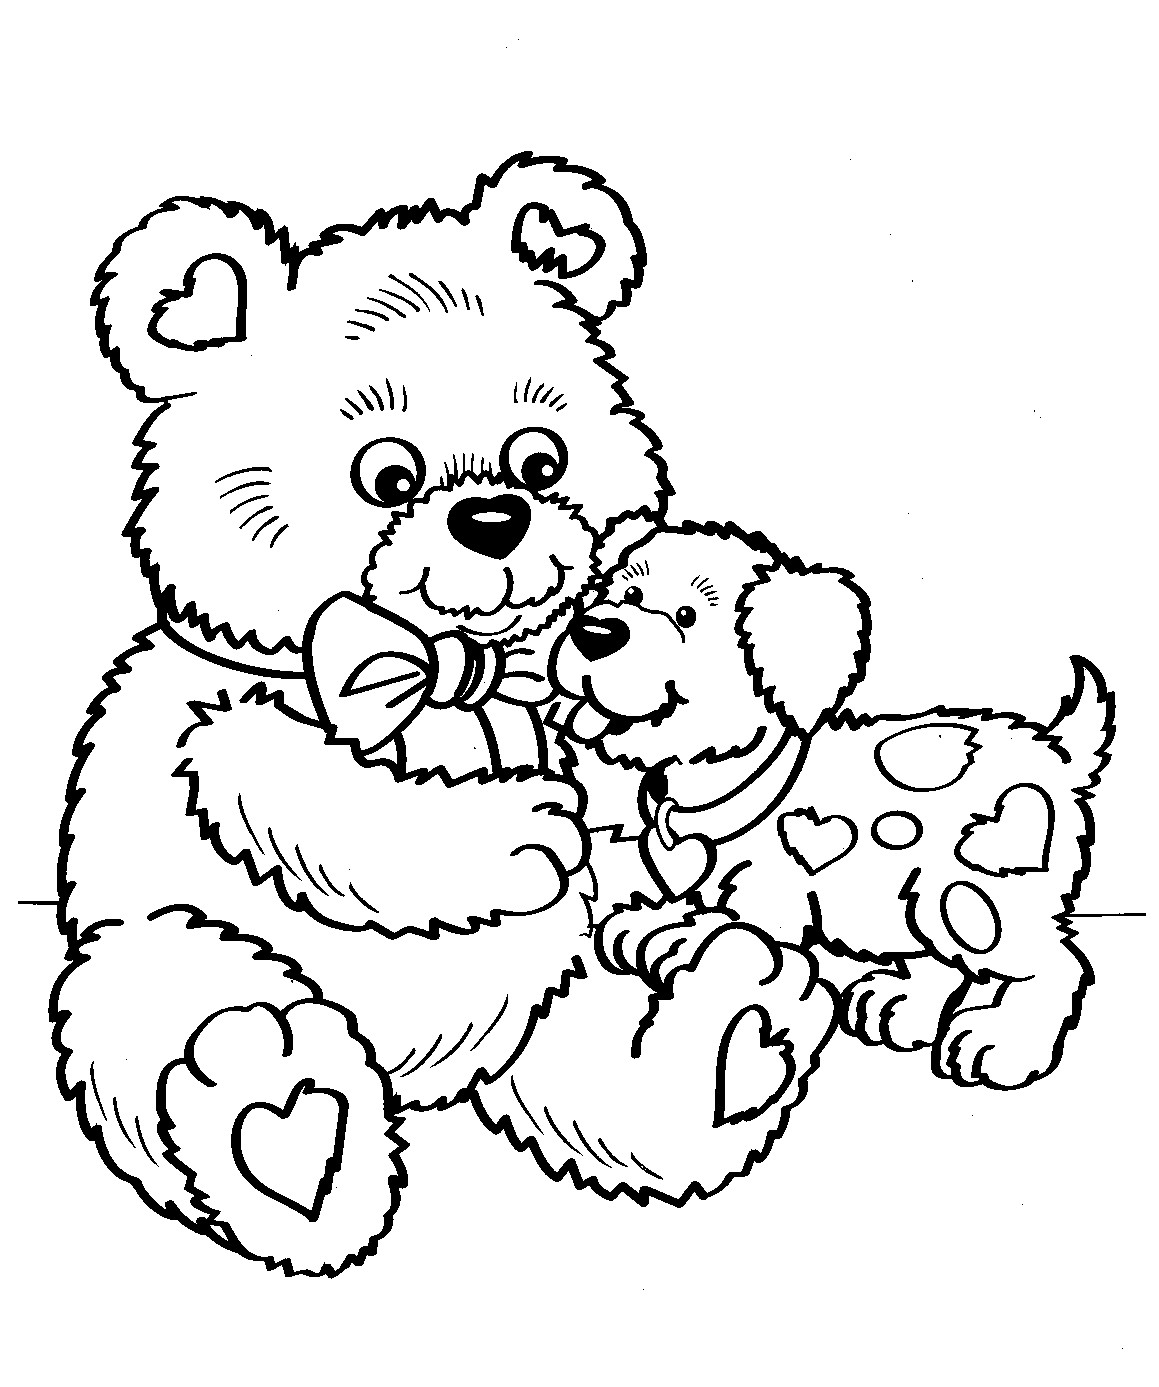 Printable Valentines Day Coloring Pages
 Coloring Pages Hearts Free Printable Coloring Pages for